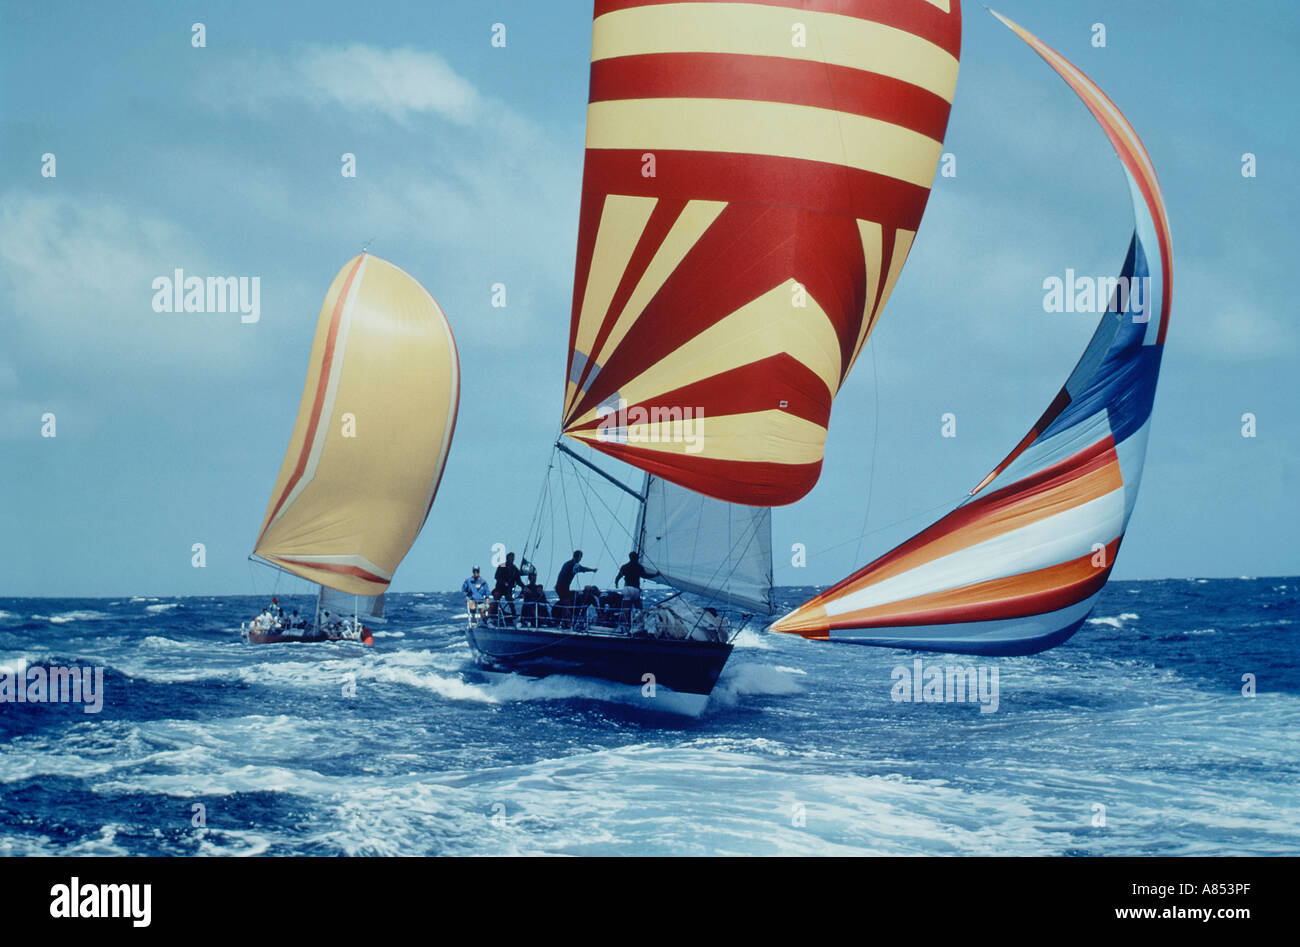 Yacht racing. Yachts with spinnaker sails. Stock Photo